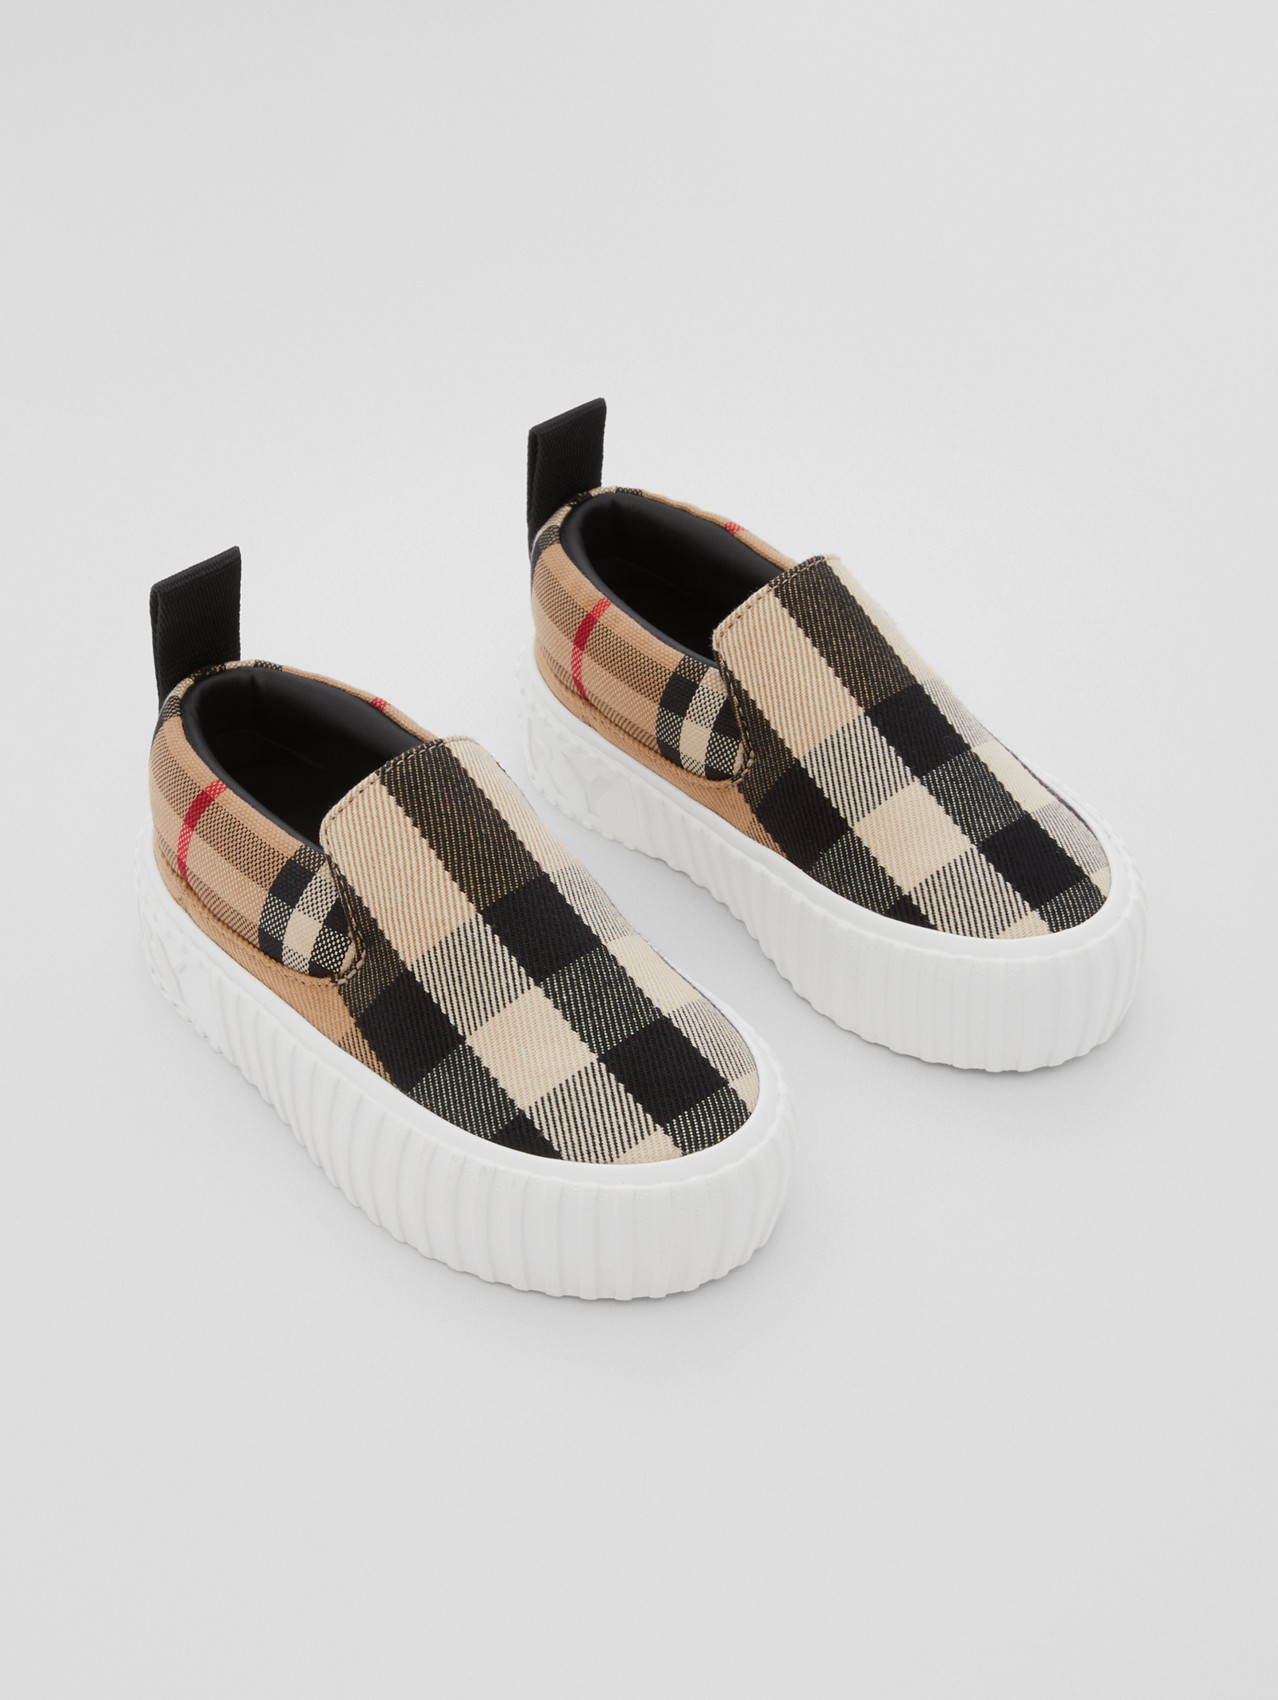 Children's Shoes | Burberry® Official